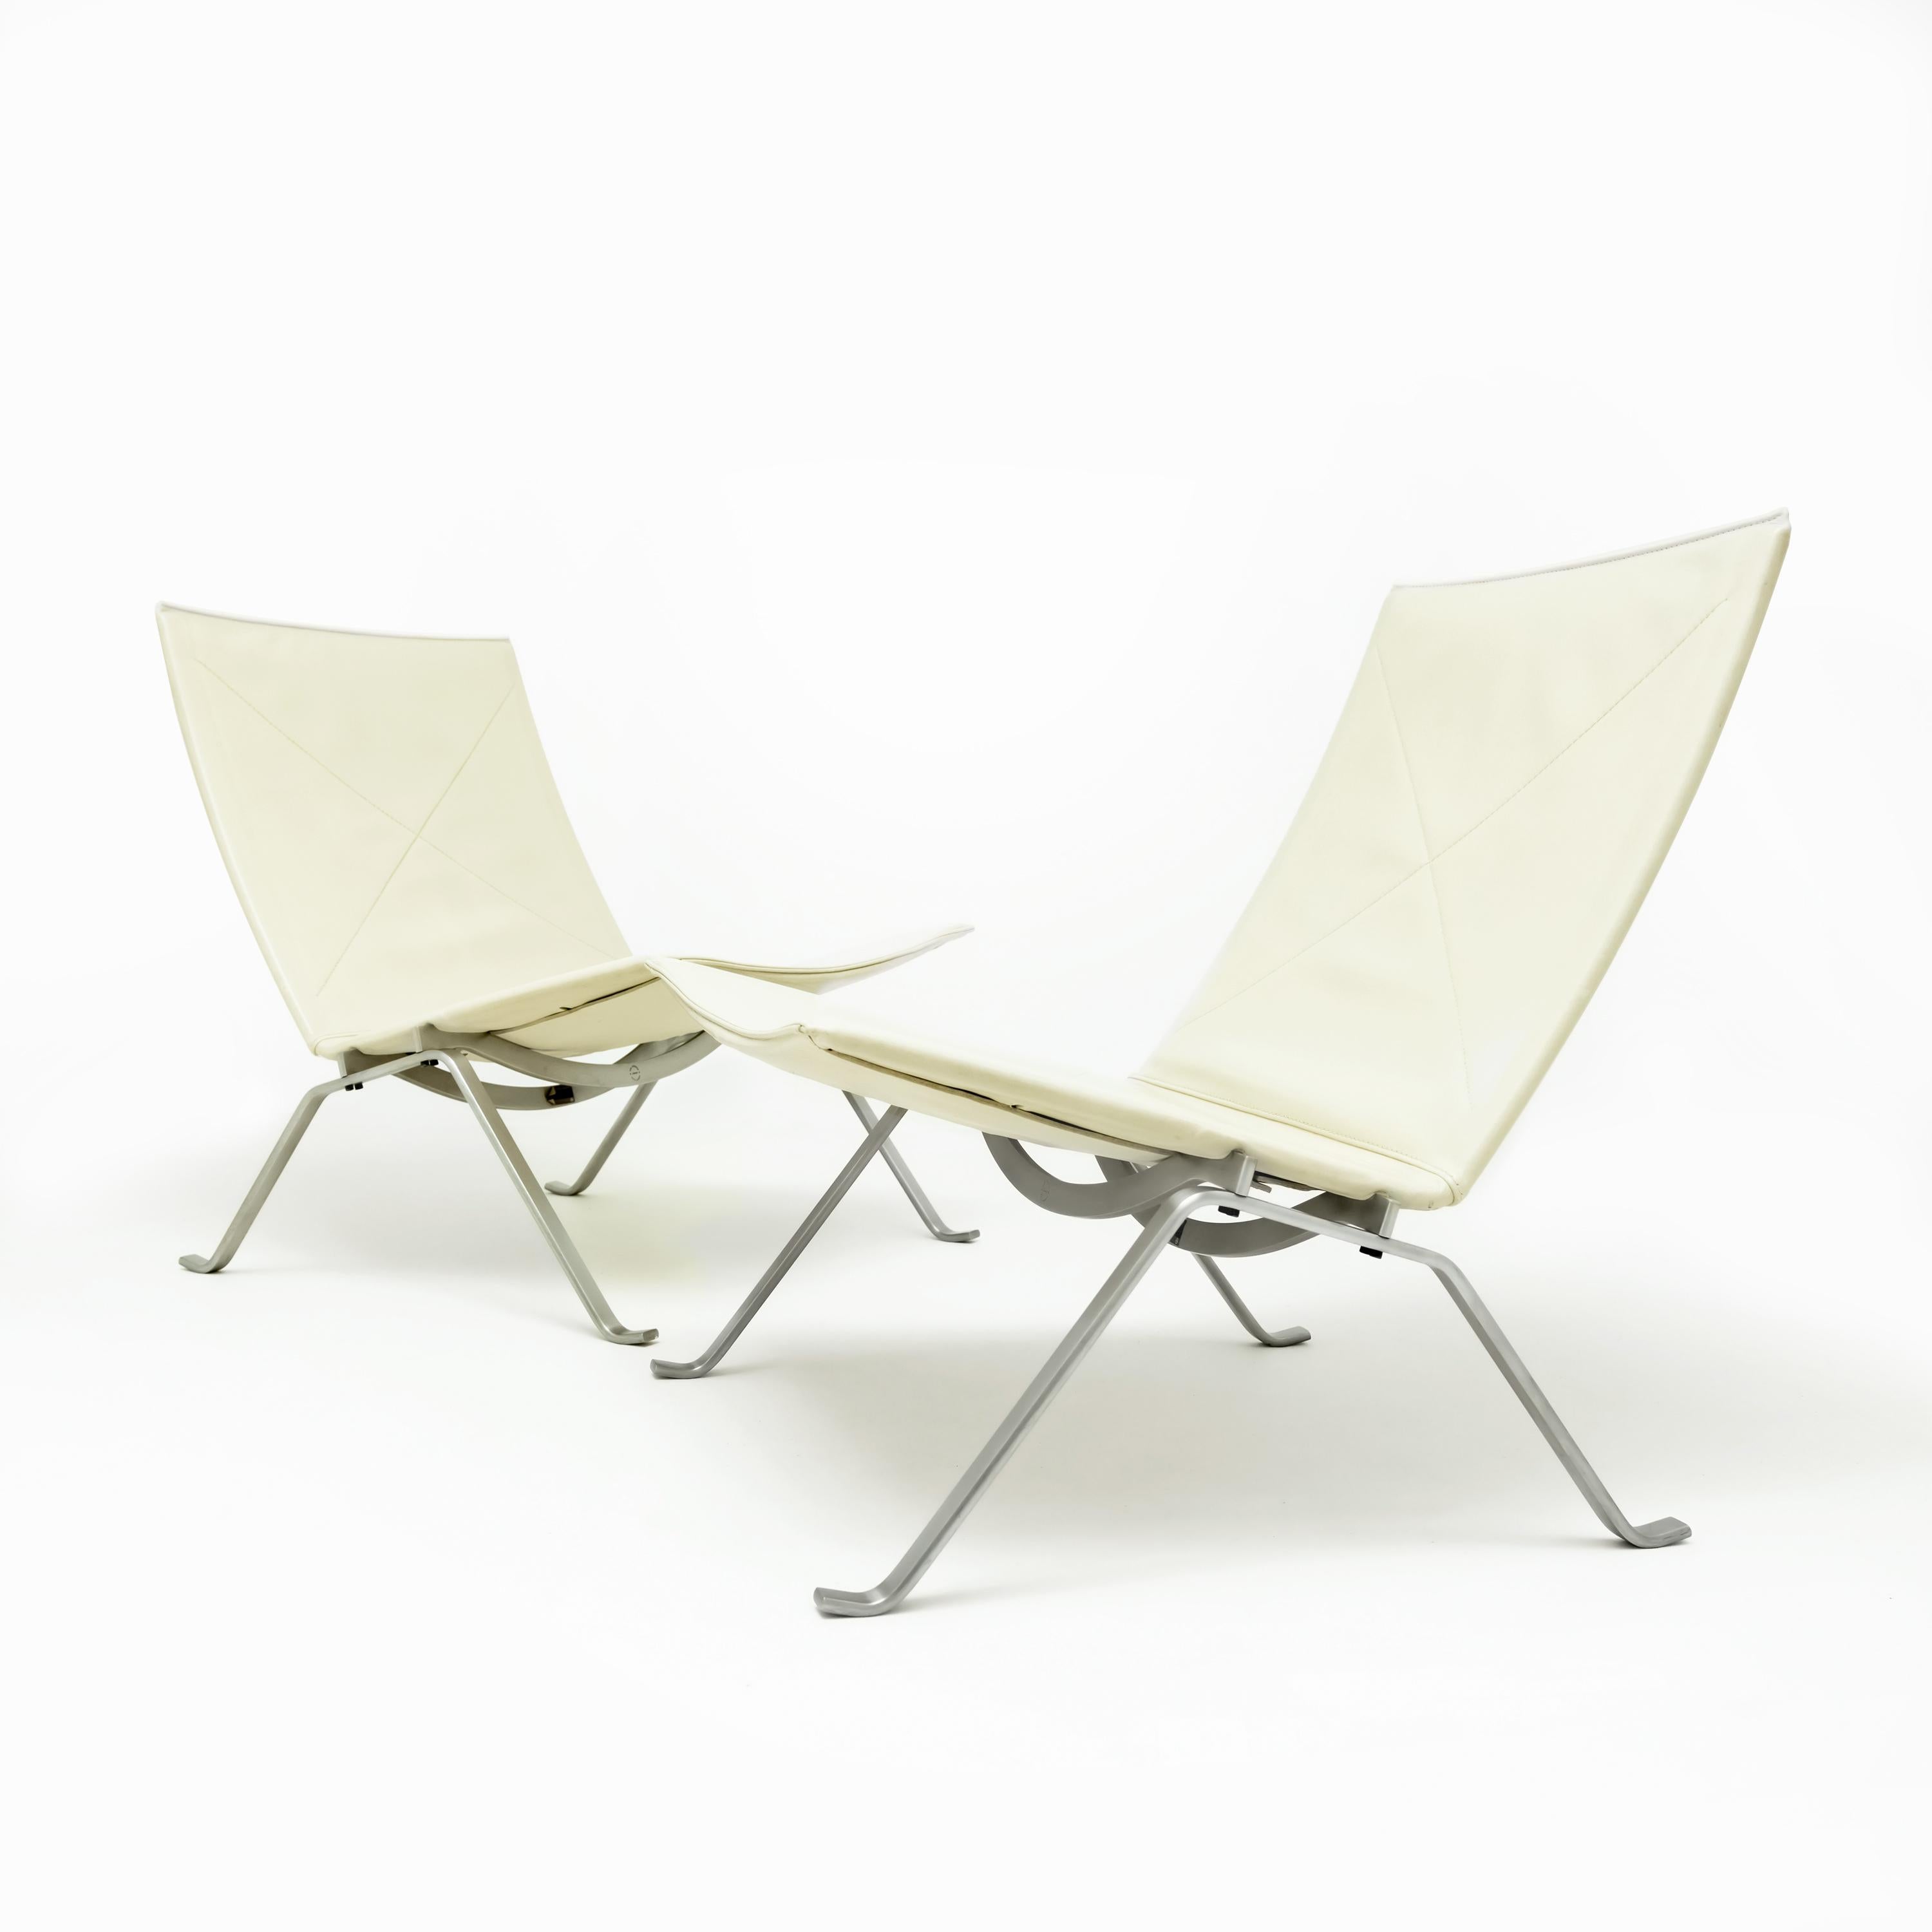 Poul Kjaerholm PK22 Lounge Chair in Cream Leather for Fritz Hansen '2 Available' 4